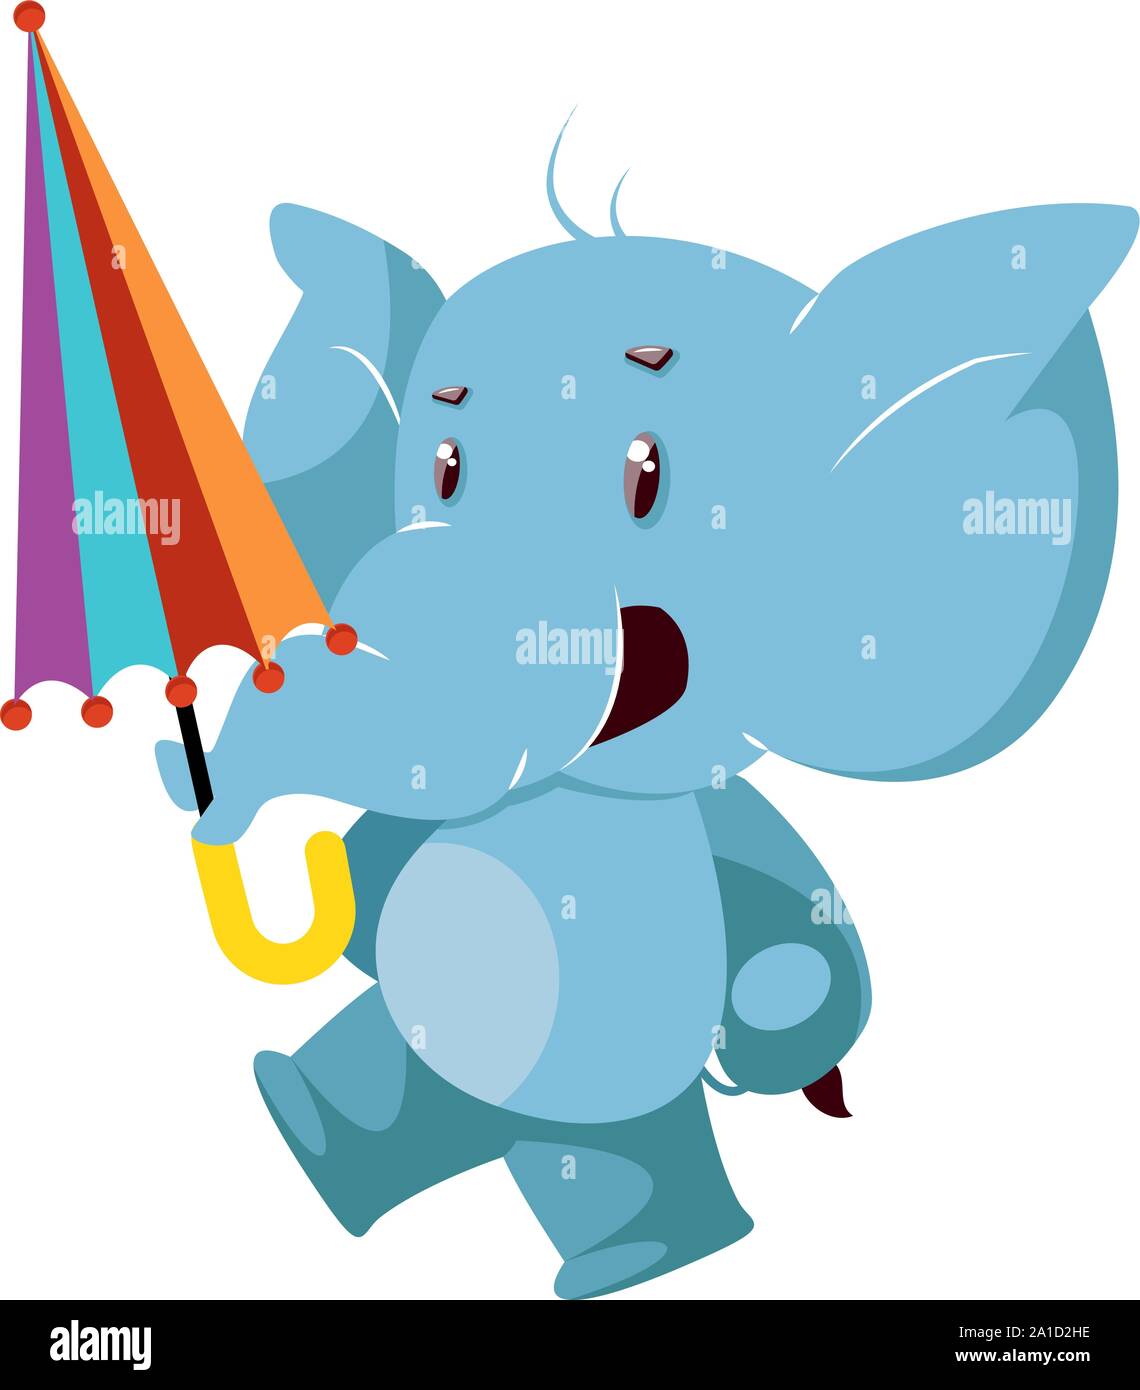 Elephant with umbrella, illustration, vector on white background. Stock Vector